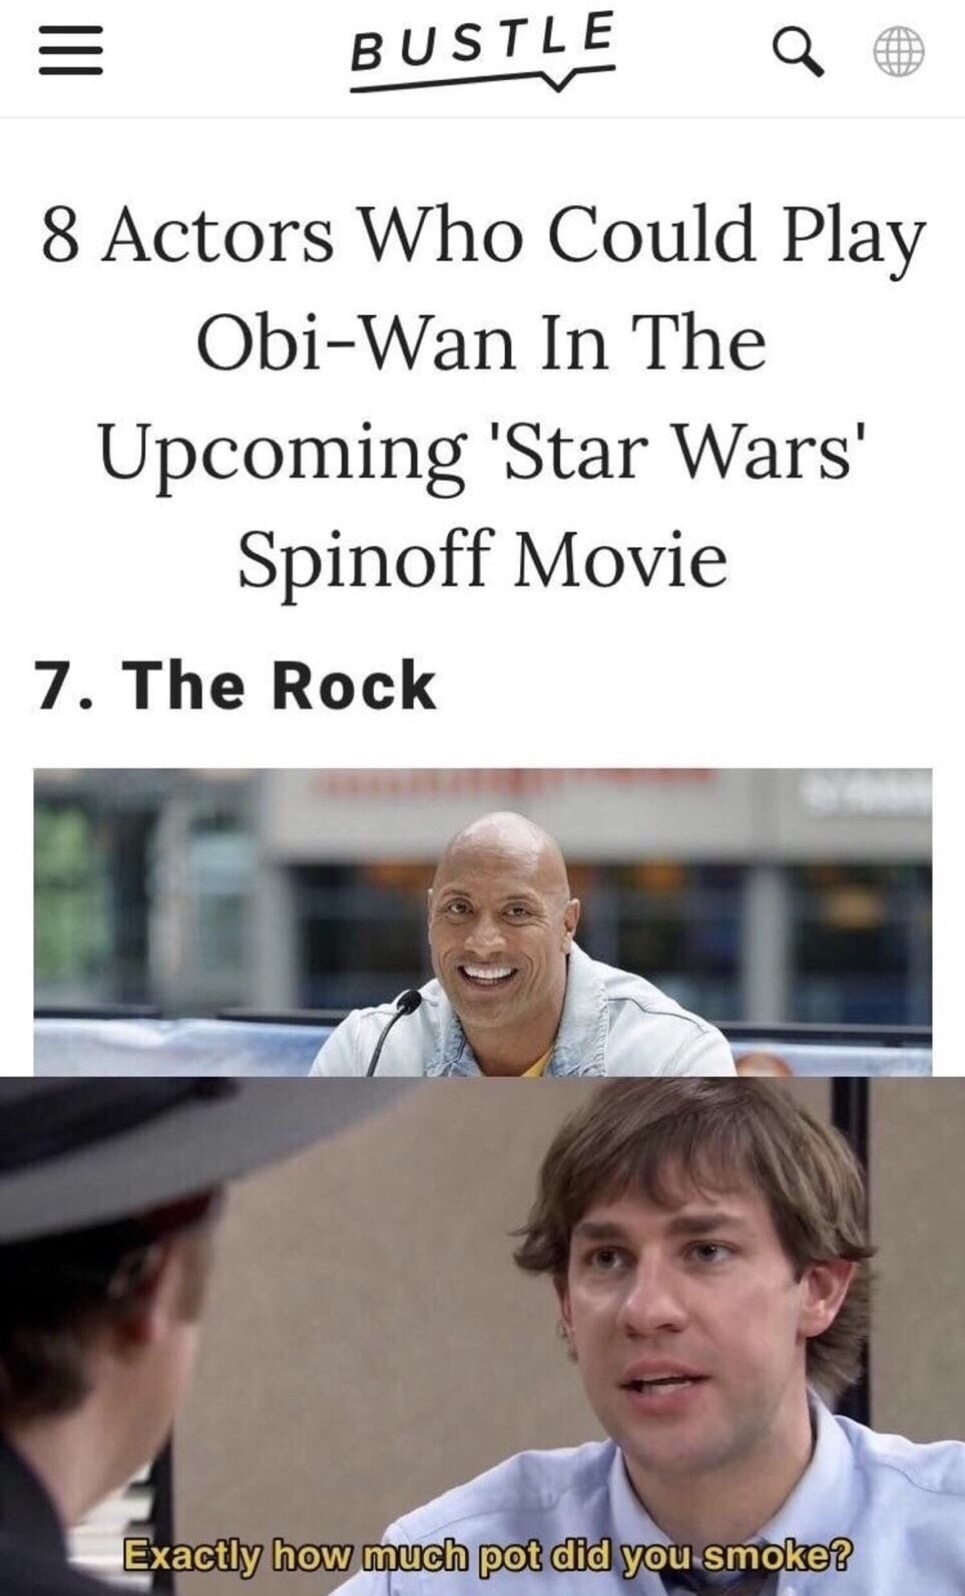 vaccines cause autism meme - Busile Q 8 Actors Who Could Play ObiWan In The Upcoming 'Star Wars' Spinoff Movie 7. The Rock Exactly how much pot did you smoke?